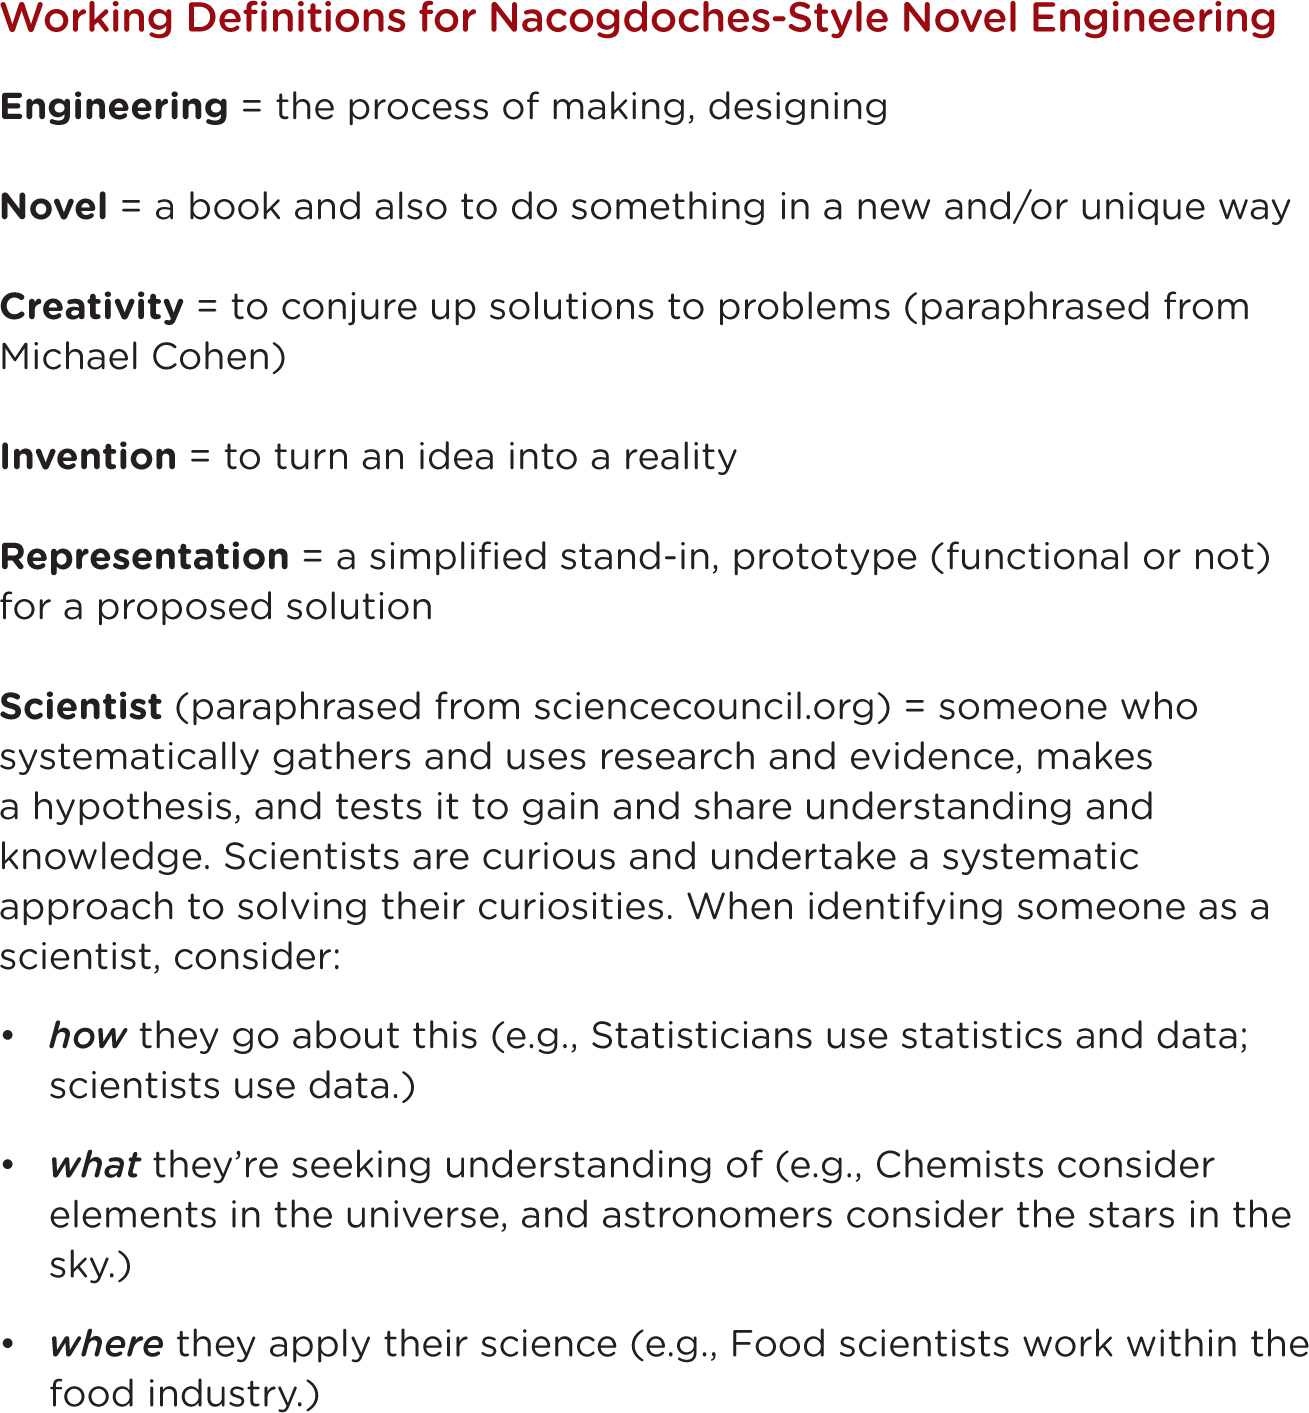 Definitions developed by the authors for the local elementary school’s novel engineering event.